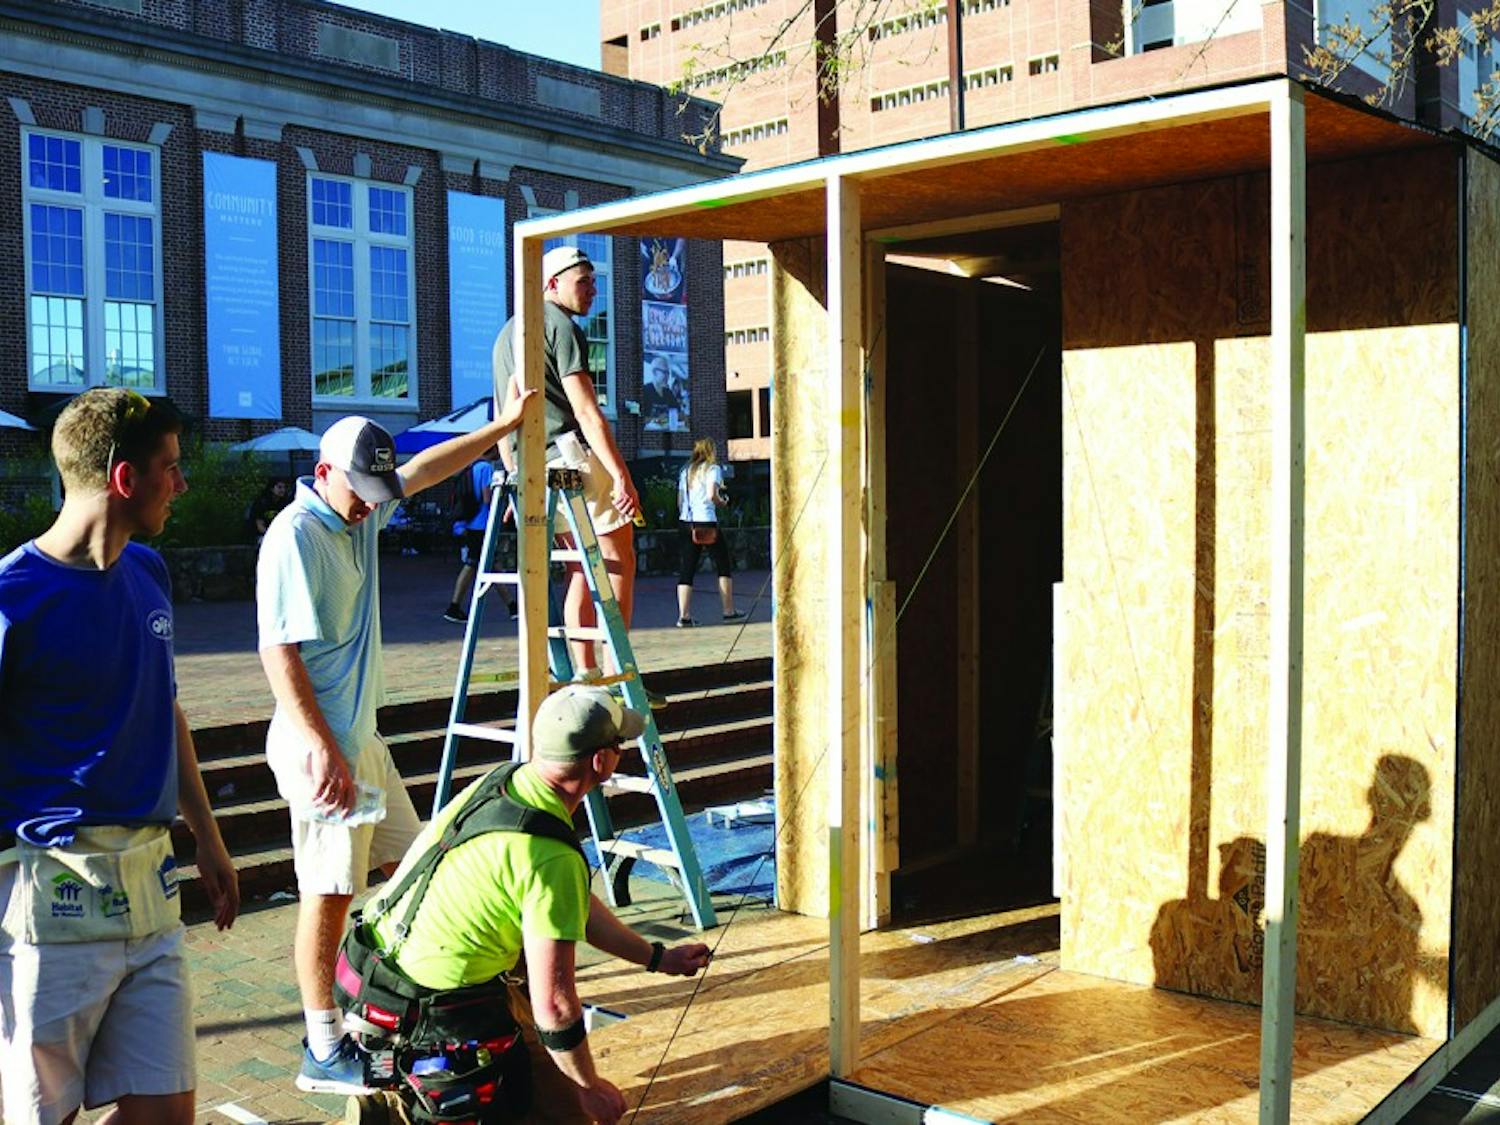 Romeo Antolini (left), Chase Jarvis, Staff Sgt. Christopher Brantley and Riley Head build a shack in the Pit for Carolina Blueprint, a weeklong fundraiser, in April 2017.